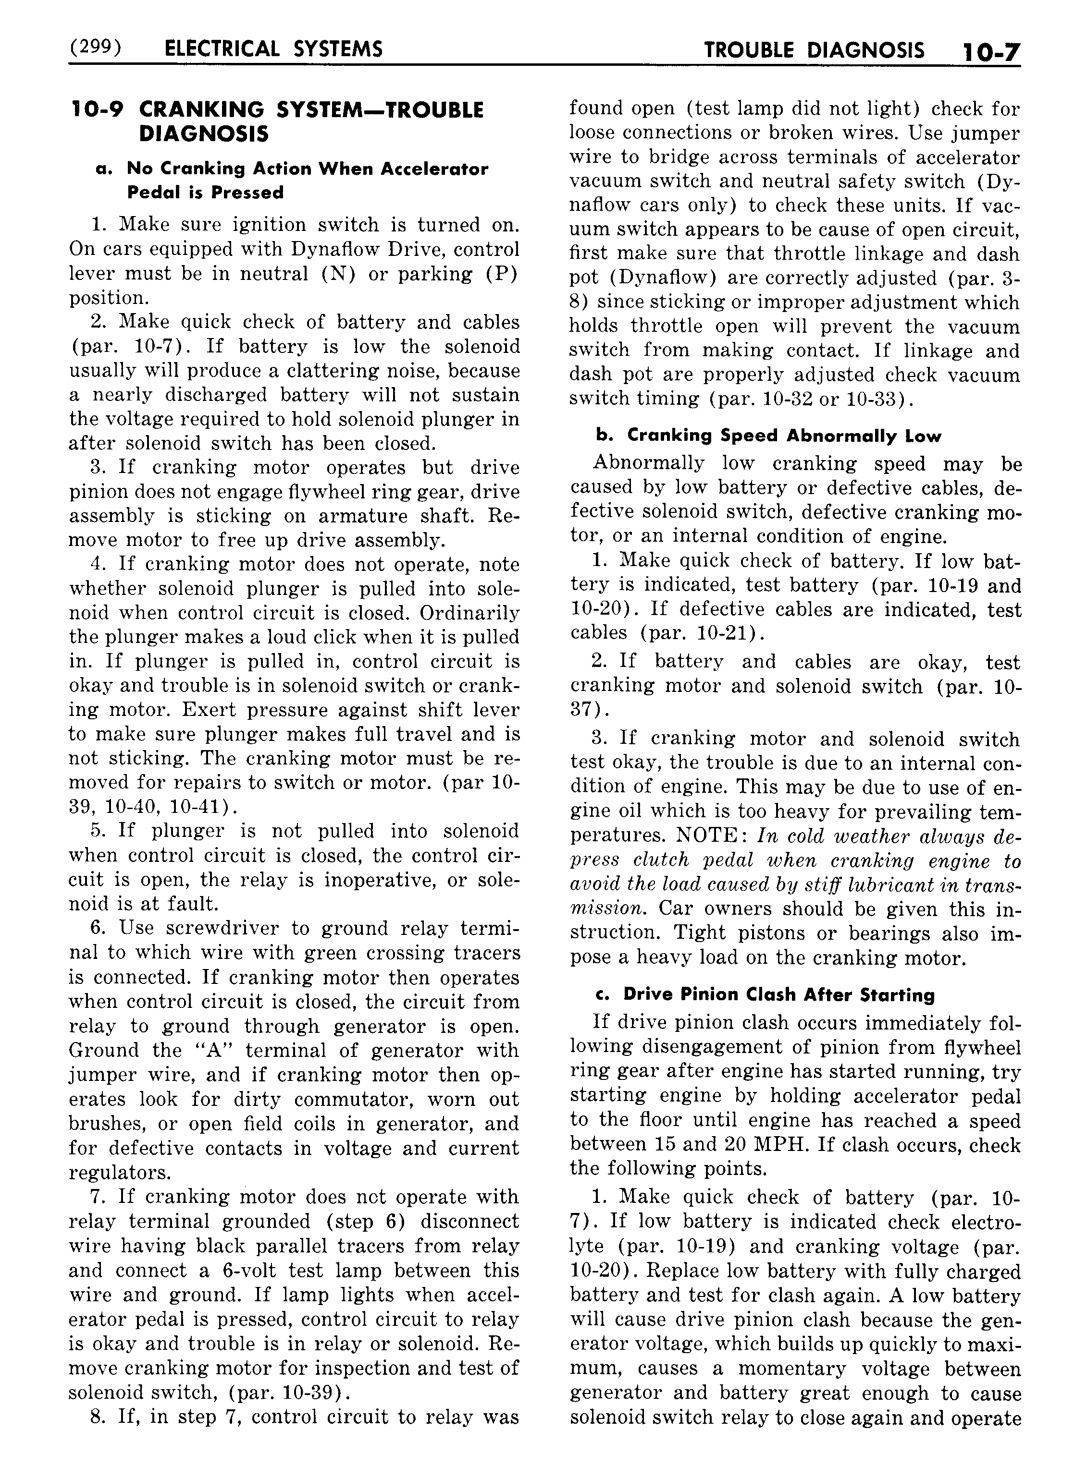 n_11 1951 Buick Shop Manual - Electrical Systems-007-007.jpg